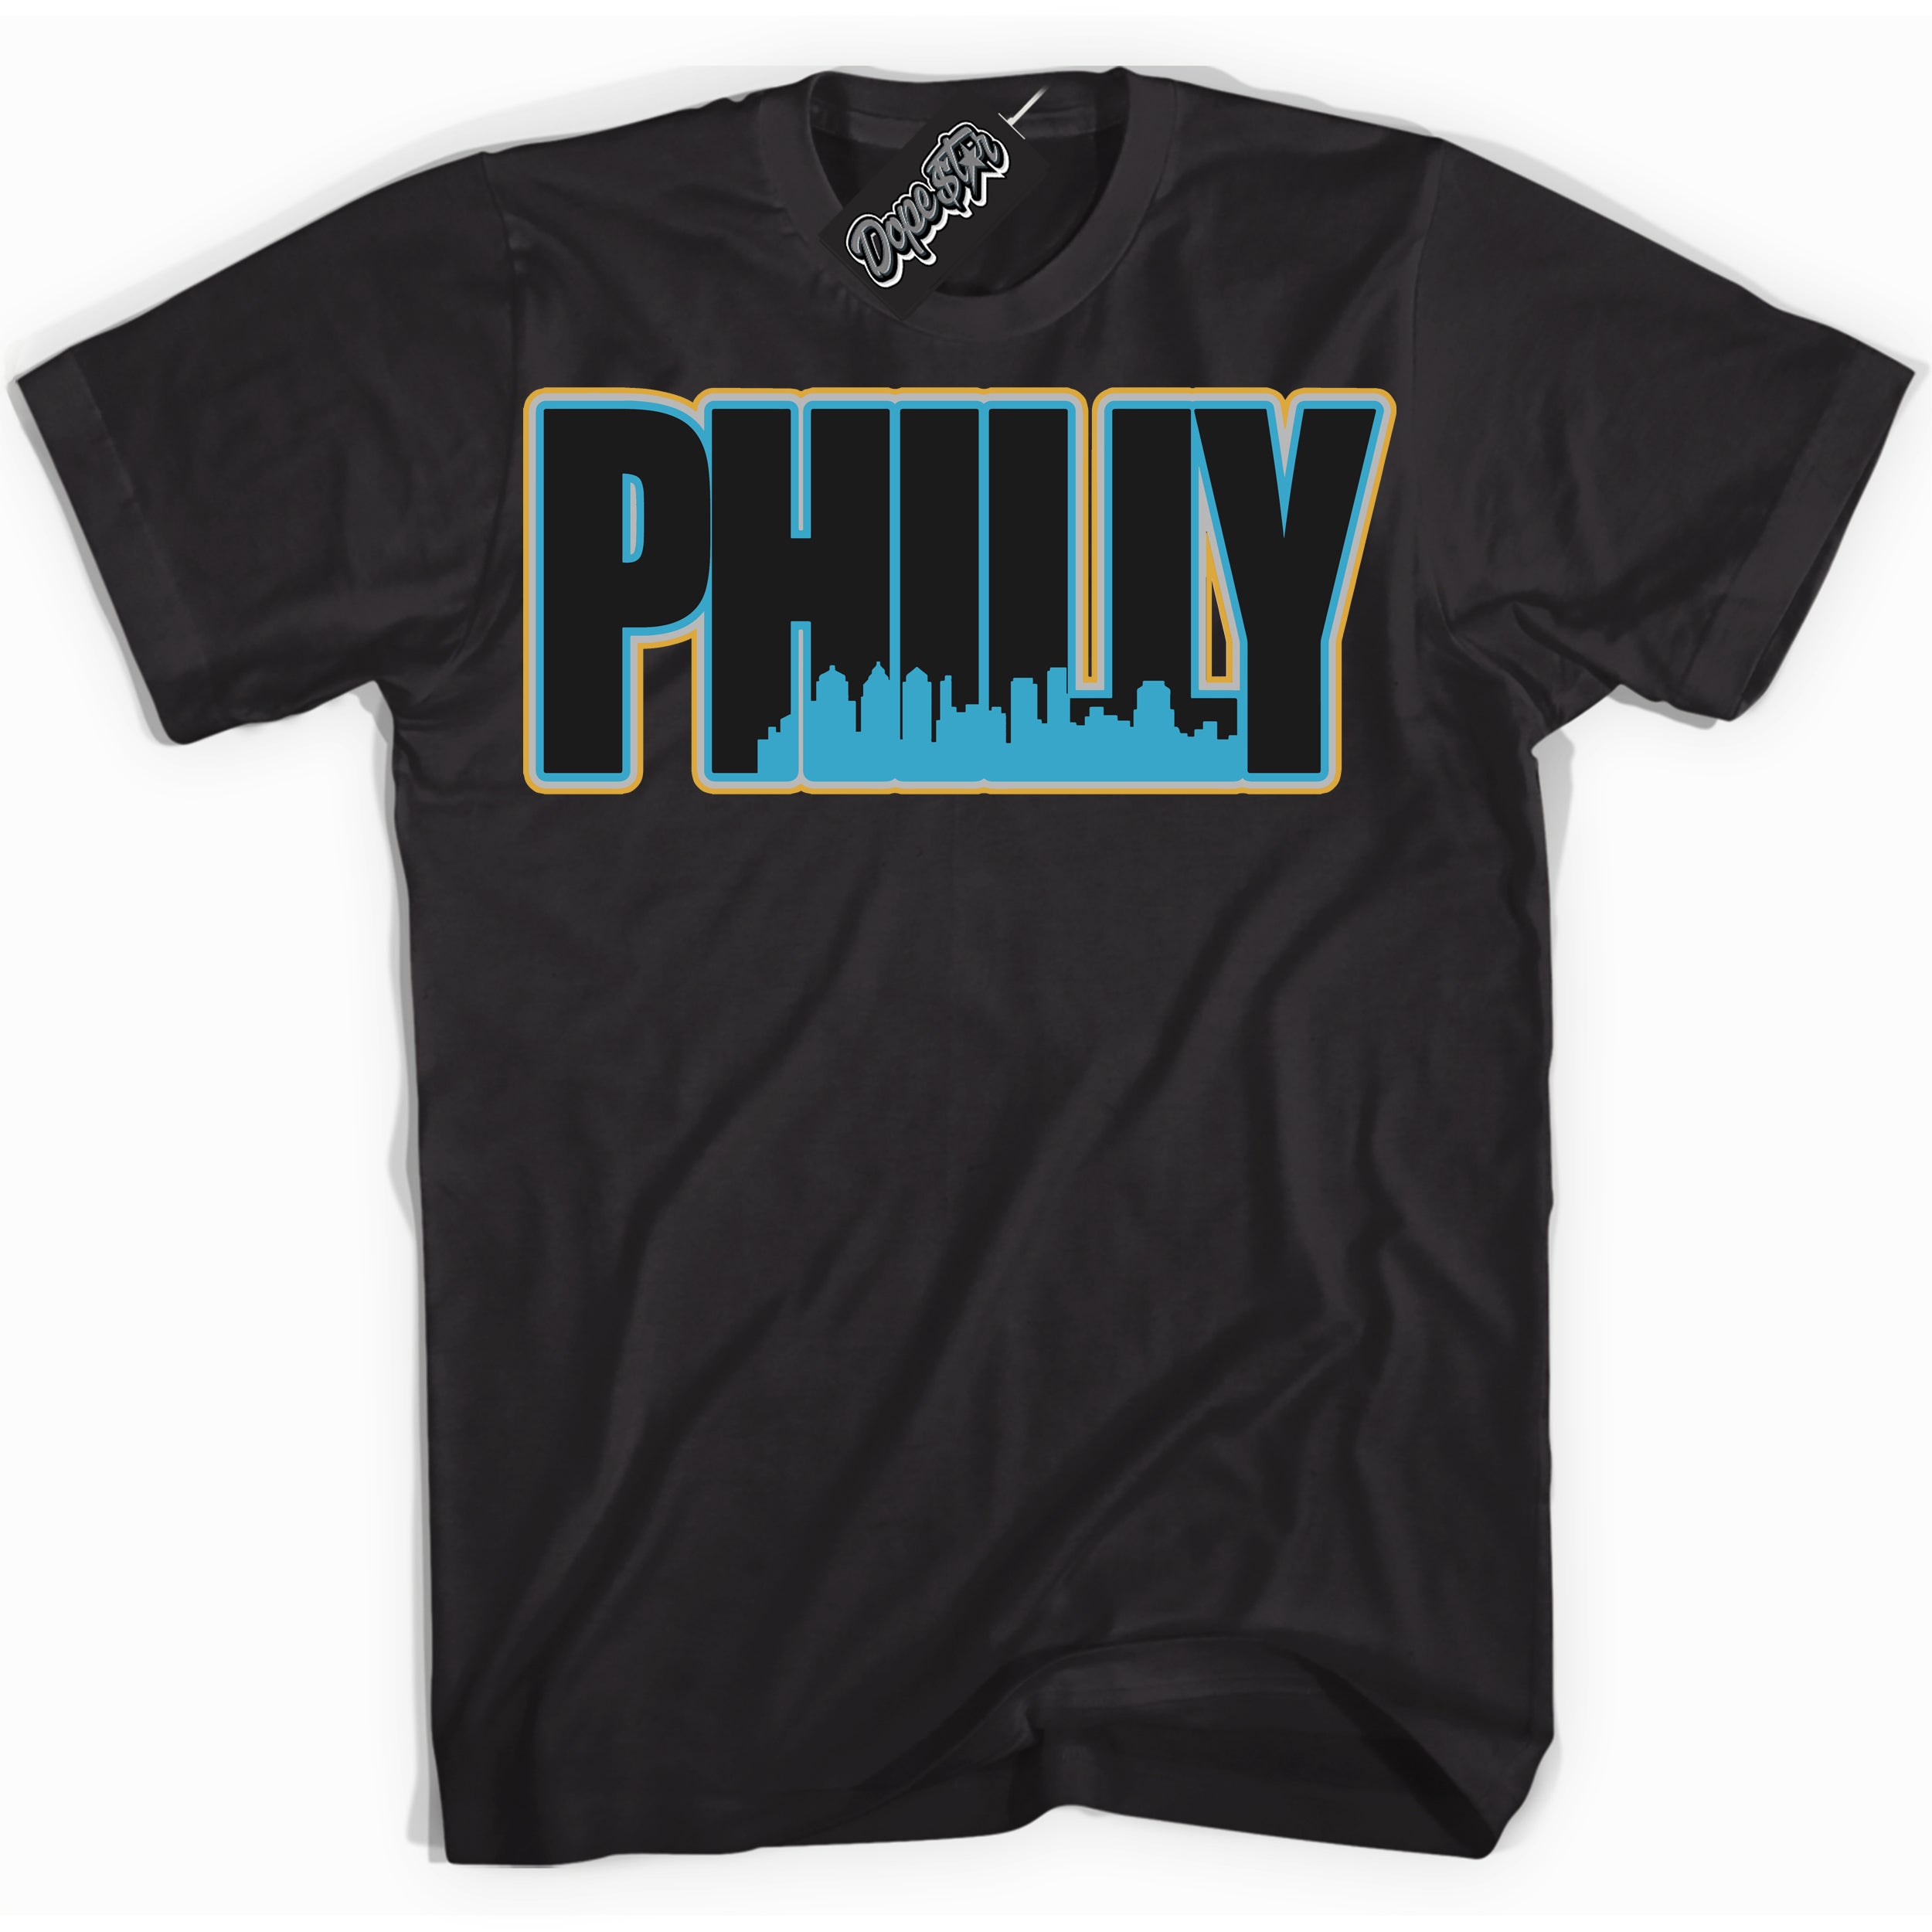 Cool Black Shirt with “ Philly” design that perfectly matches Aqua 5s Sneakers.